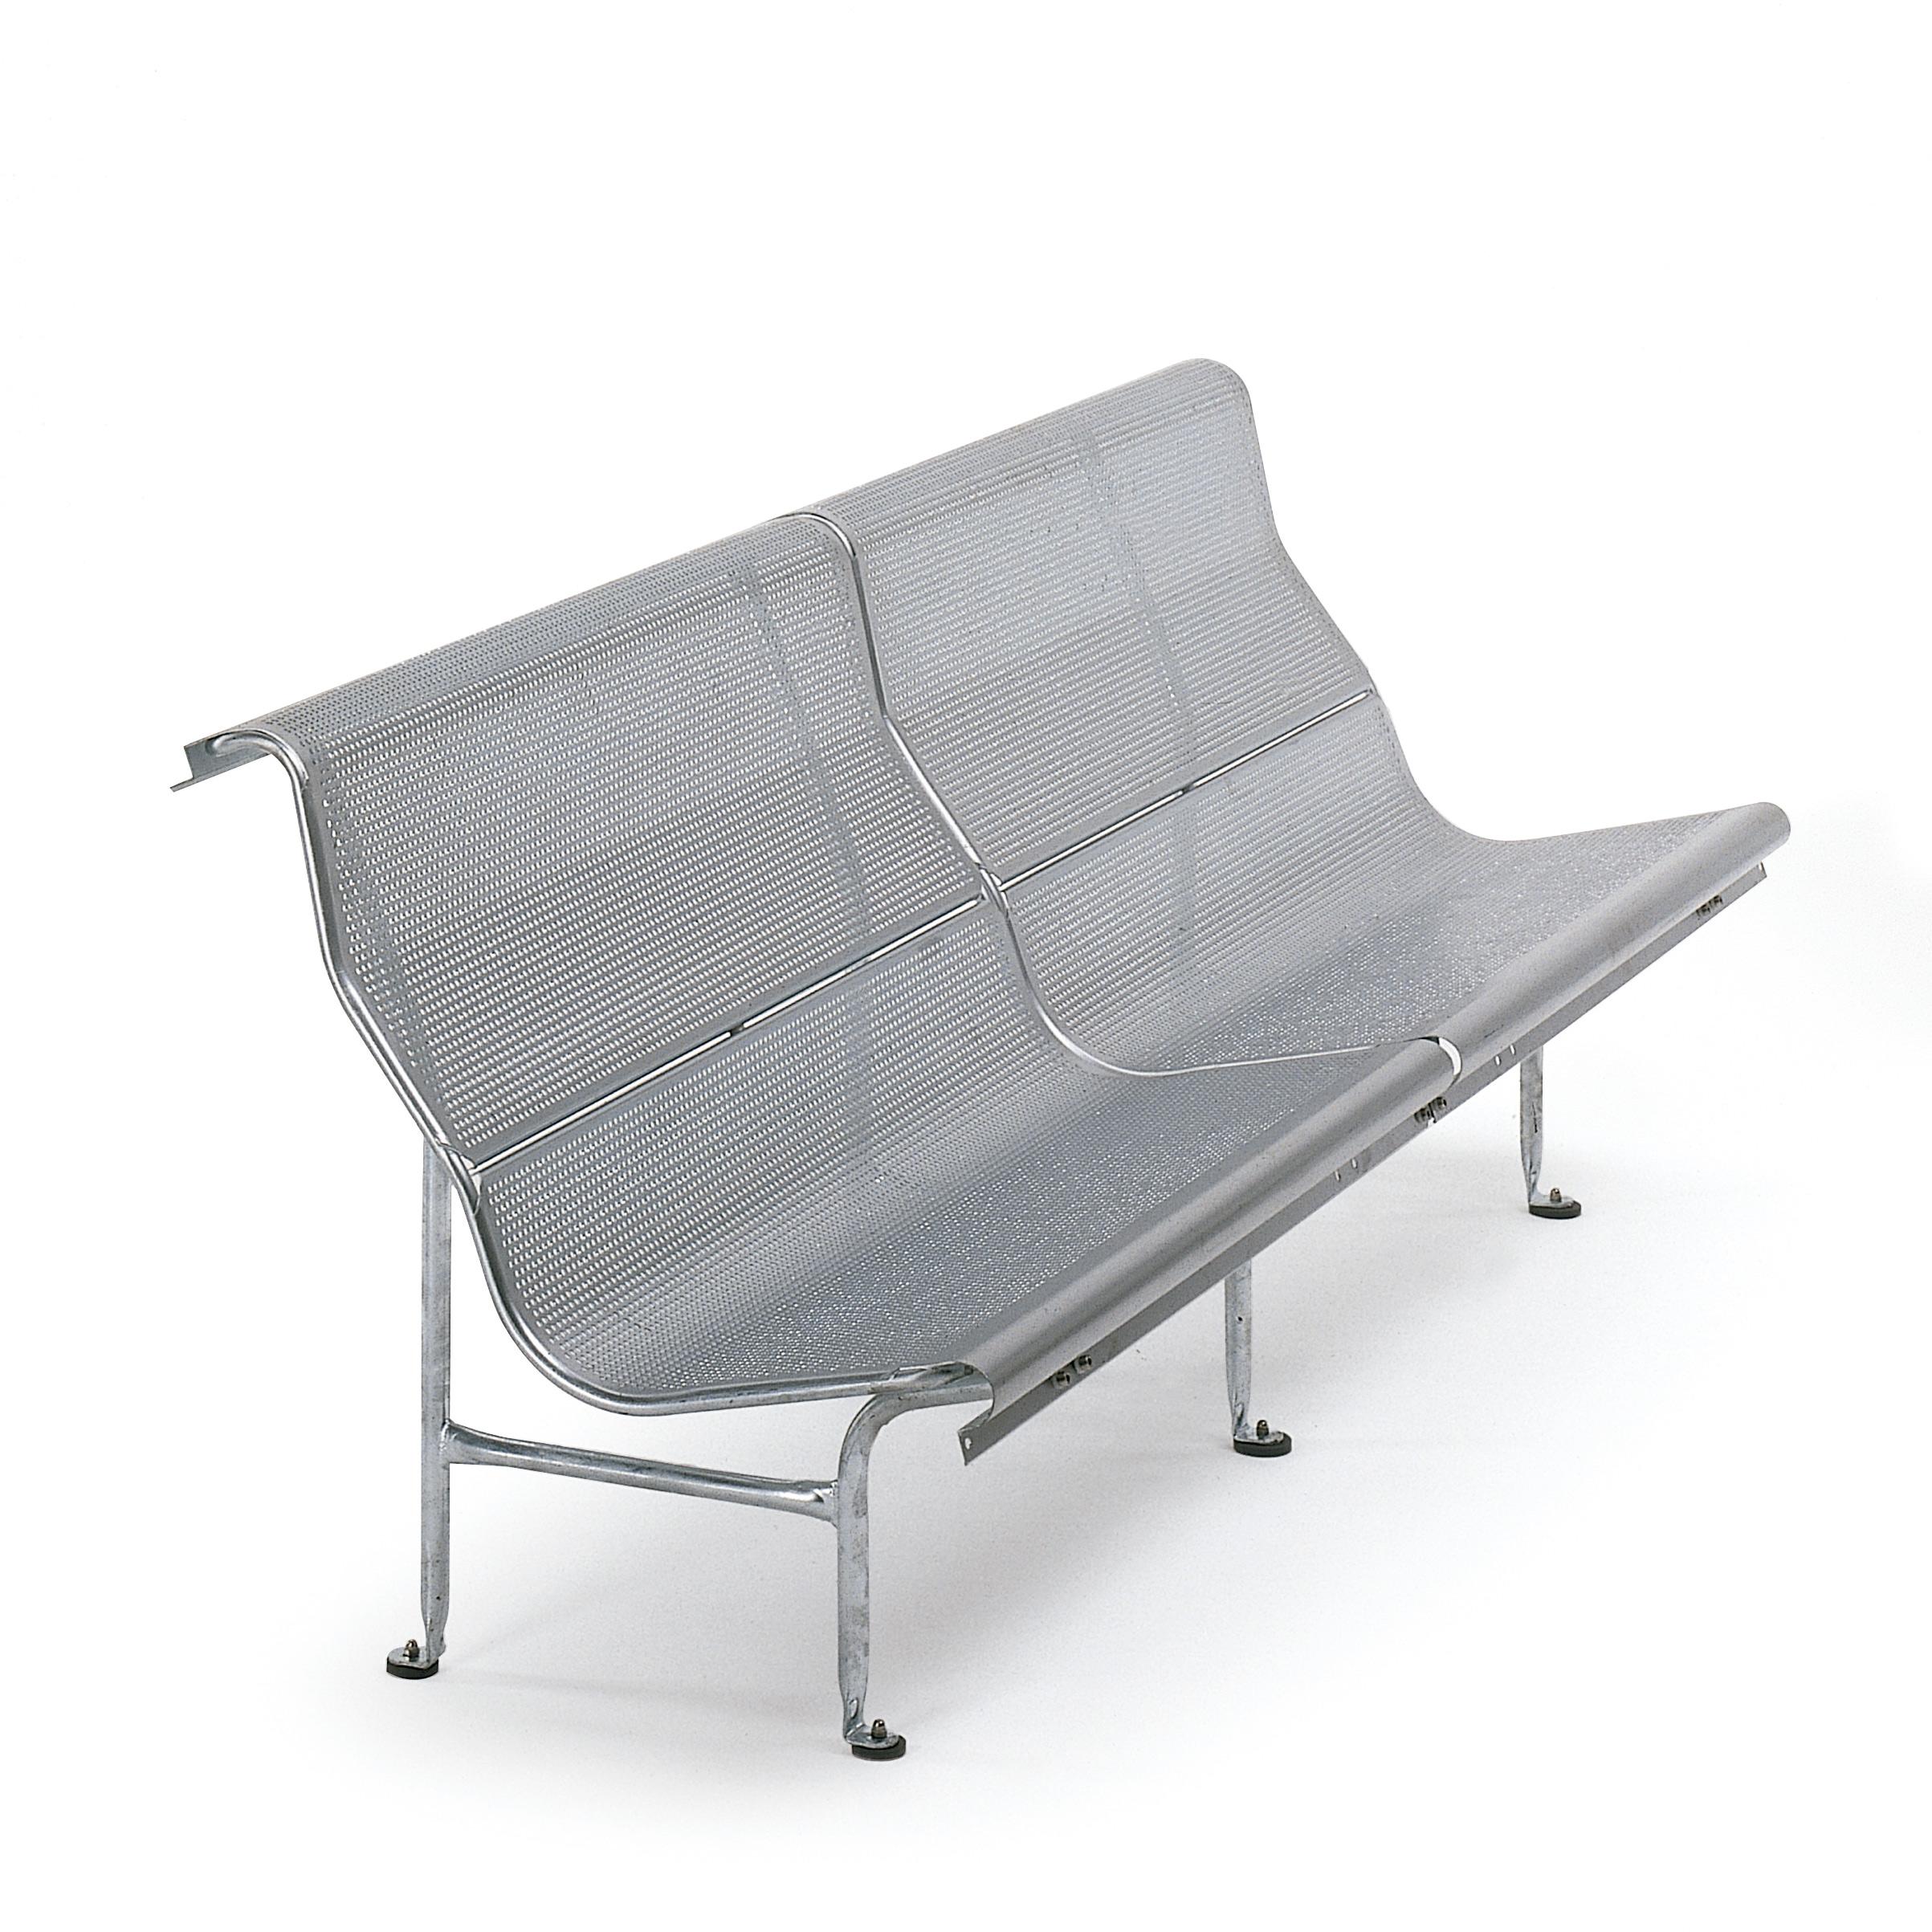 The profile of this bench is taken from a bench designed by Gaudi for Güell Park in Barcelona. The authors affirm that the benches ergonomics are unimprovable. They have been part of our catalogue since in 1974.

Legs intubular steel and seat in